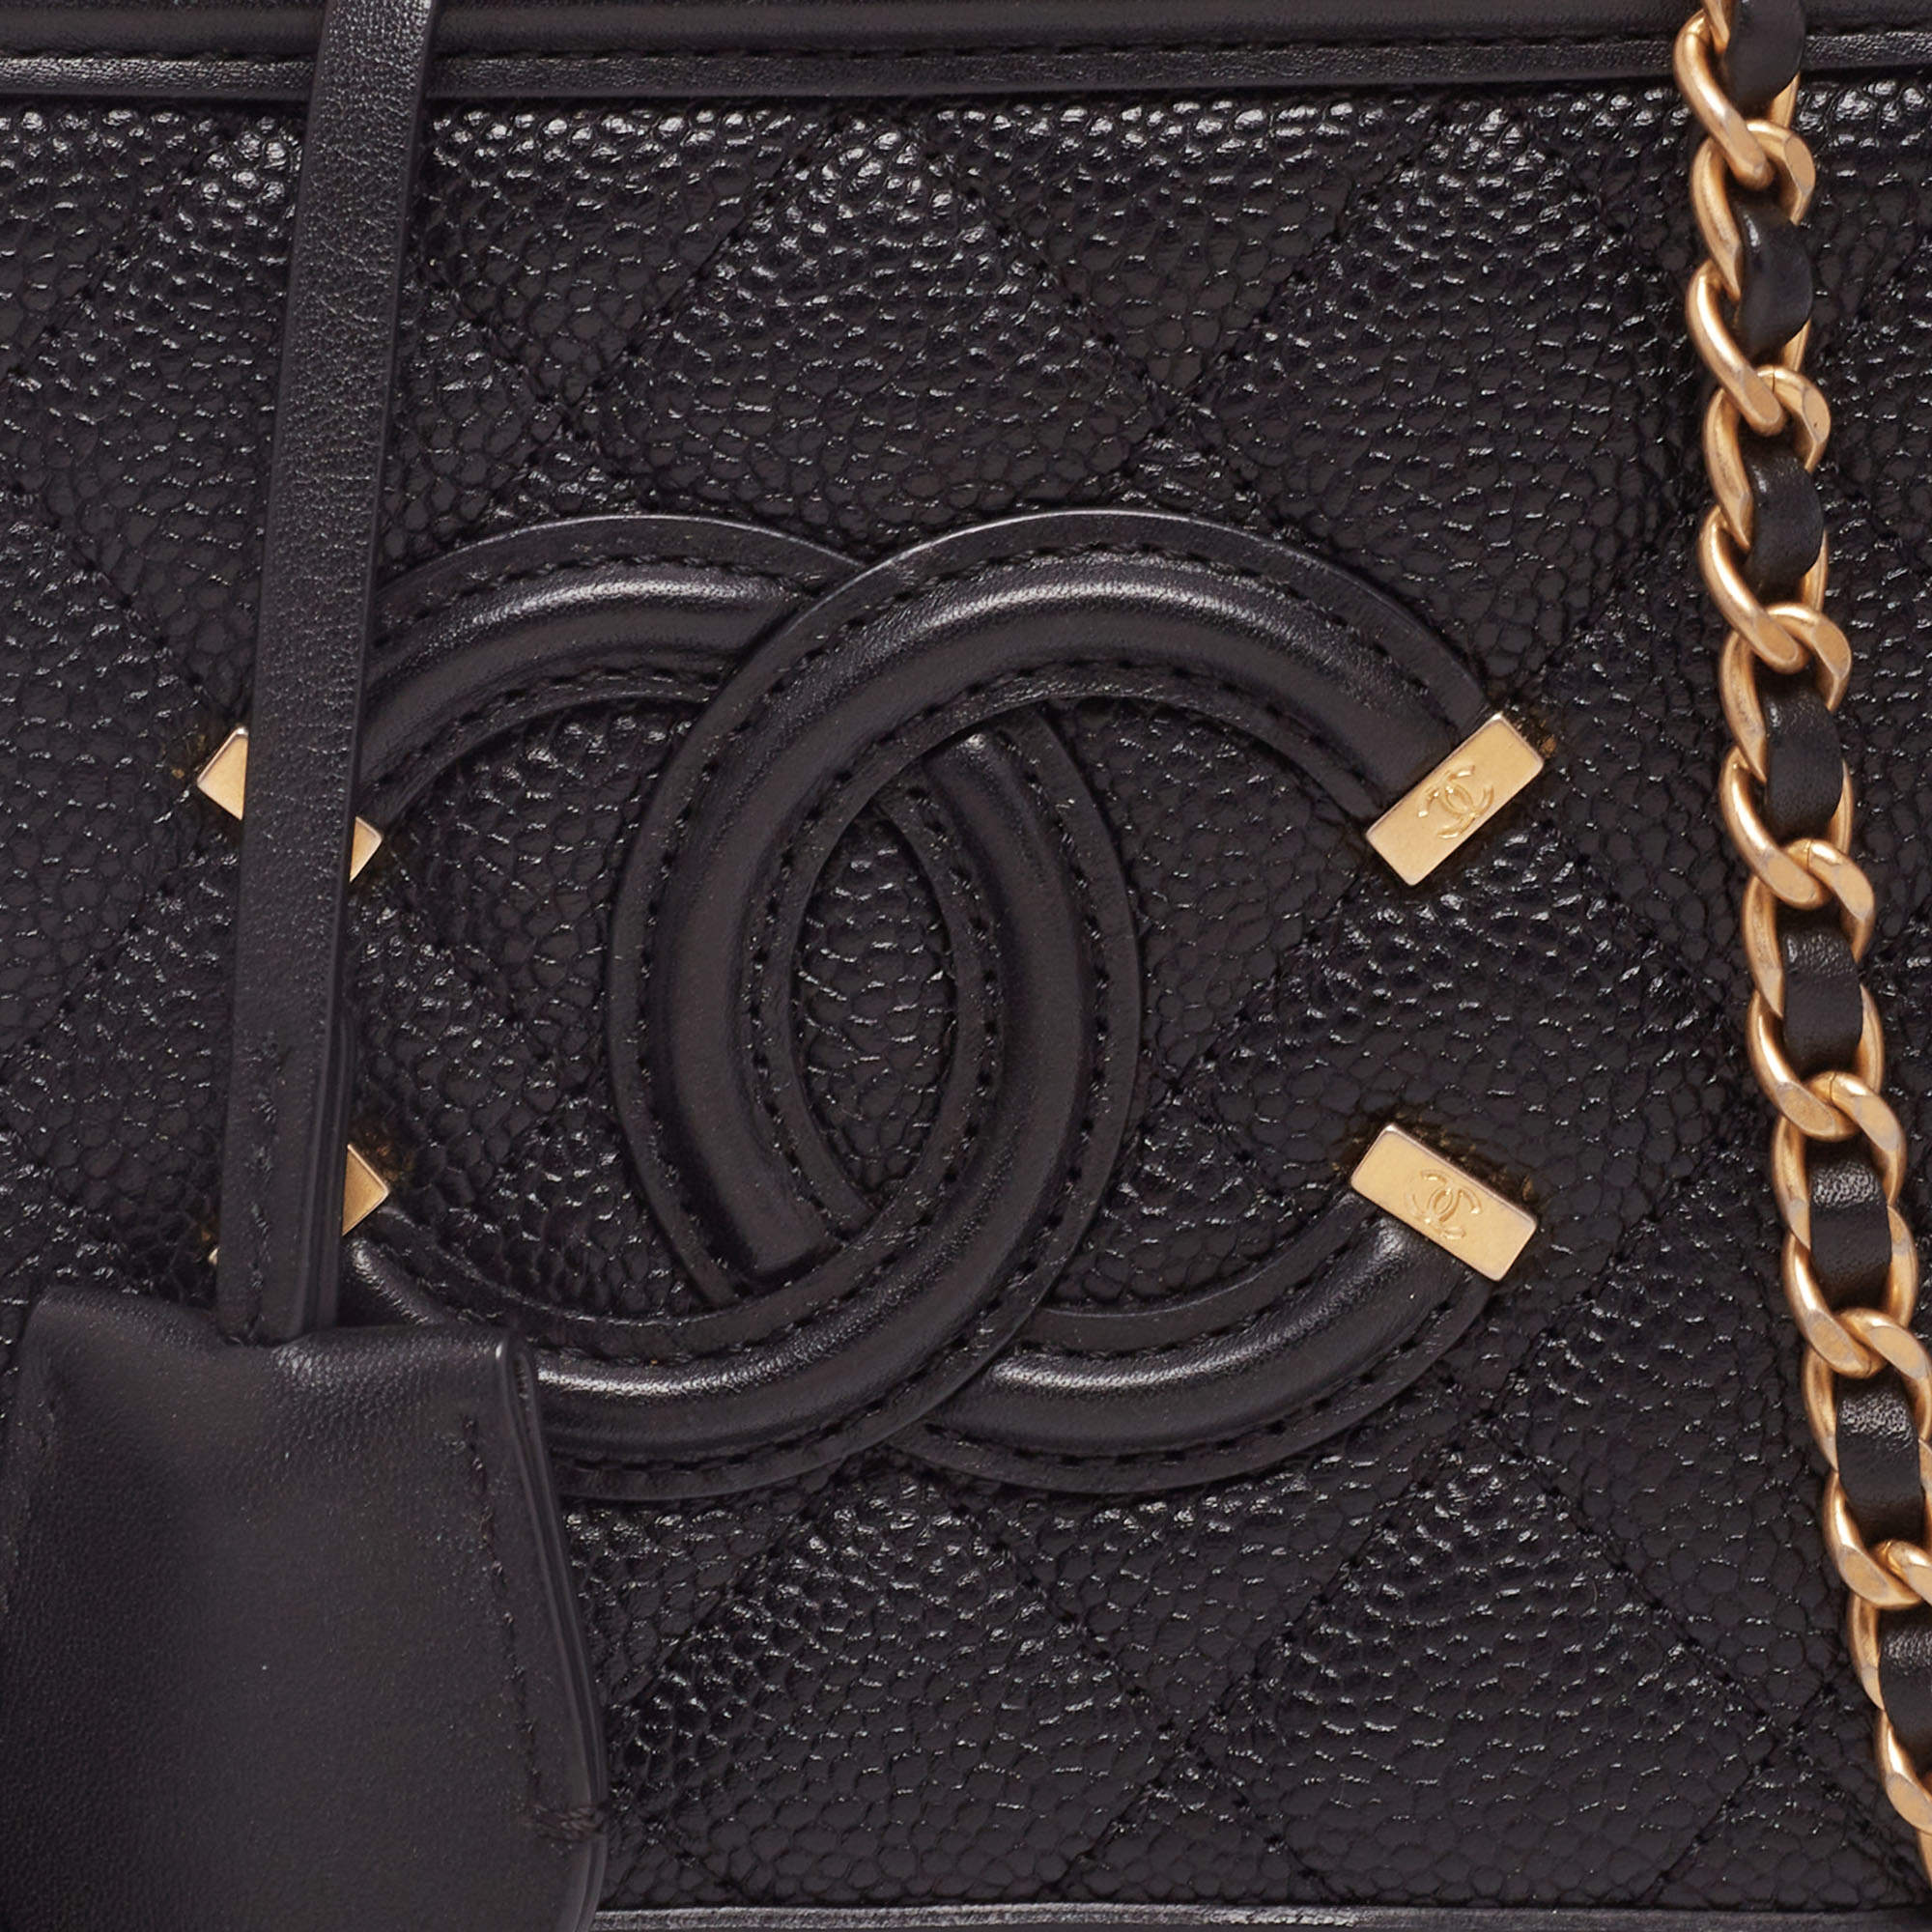 Chanel Black Quilted Caviar Leather Small CC Filigree Vanity Case